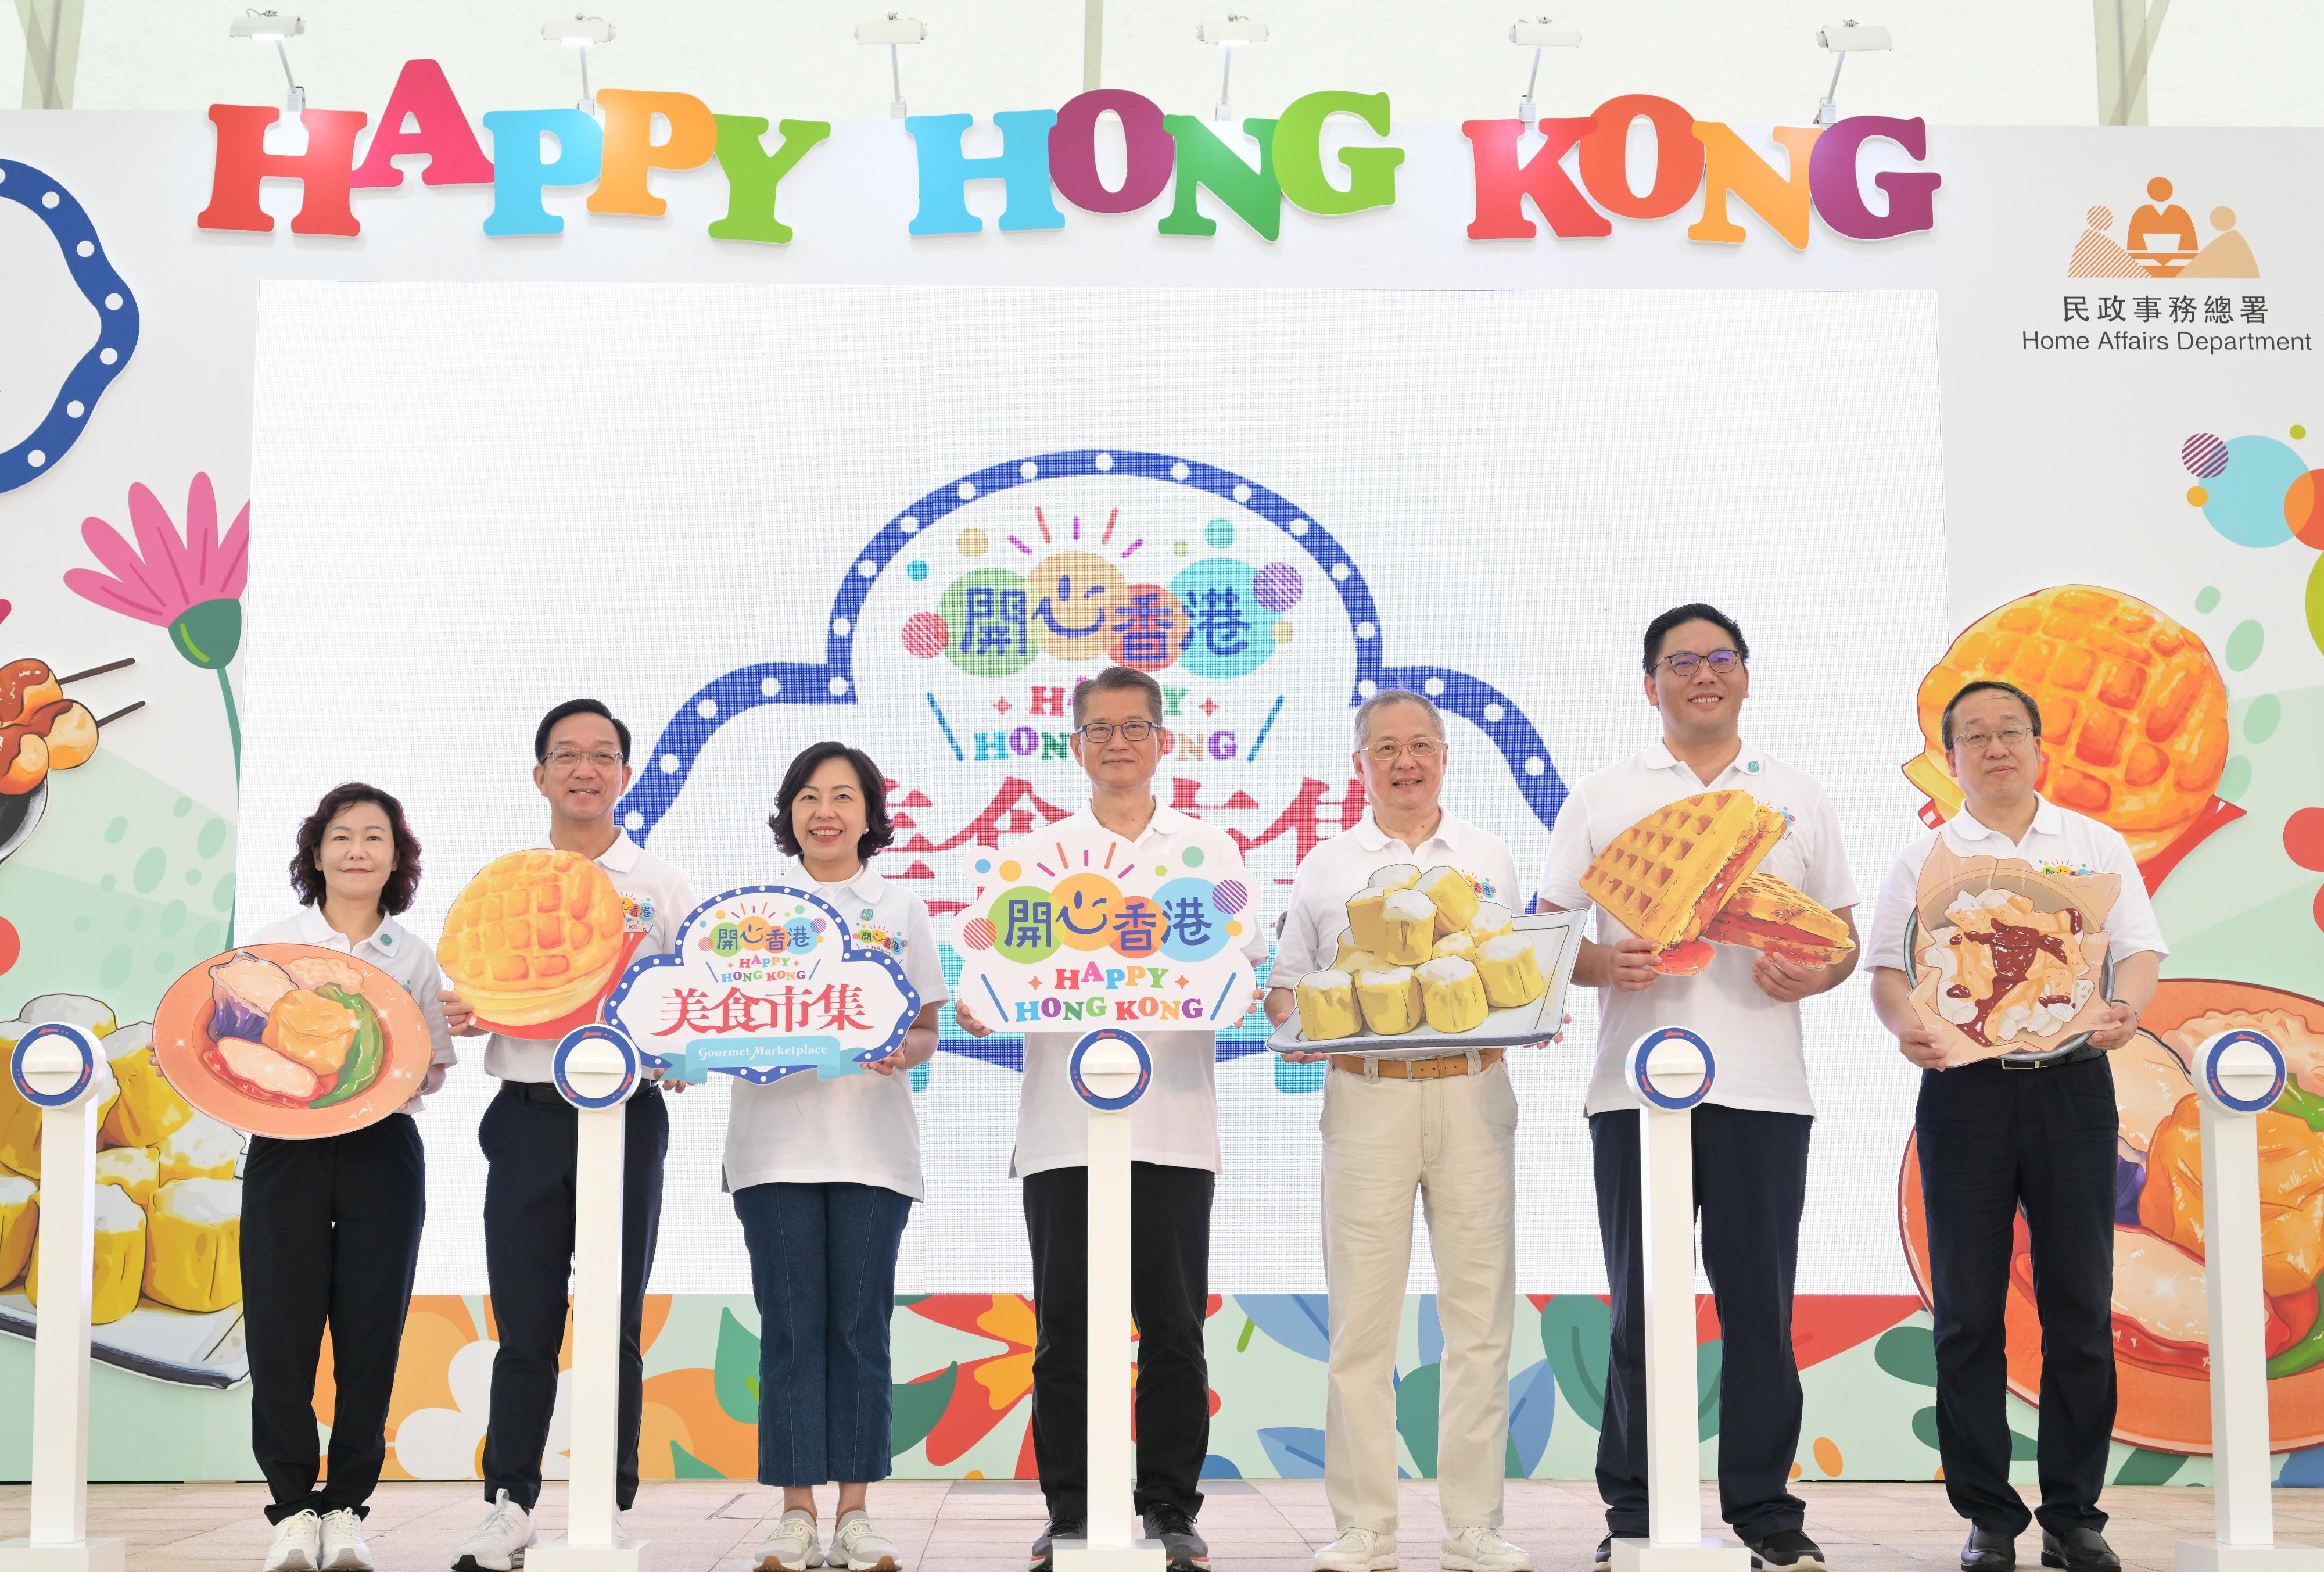 The Financial Secretary, Mr Paul Chan, officiated at the opening ceremony of the second "Happy Hong Kong" Gourmet Marketplace today (May 6). Photo shows (from left) the Director of Home Affairs, Mrs Alice Cheung; 
Legislative Council (LegCo) Member (Heung Yee Kuk), the Chairman of New Territories Heung Yee Kuk Mr Kenneth Lau; the Secretary for Home and Youth Affairs, Miss Alice Mak; Mr Chan; Non-official Member of the Executive Council, LegCo Member (Catering) Mr Tommy Cheung; the Under Secretary for Home and Youth Affairs, Mr Clarence Leung; and Vice-Chairman and President of the Hong Kong Chinese Enterprises Association Mr Yu Xiao officiating at the ceremony.